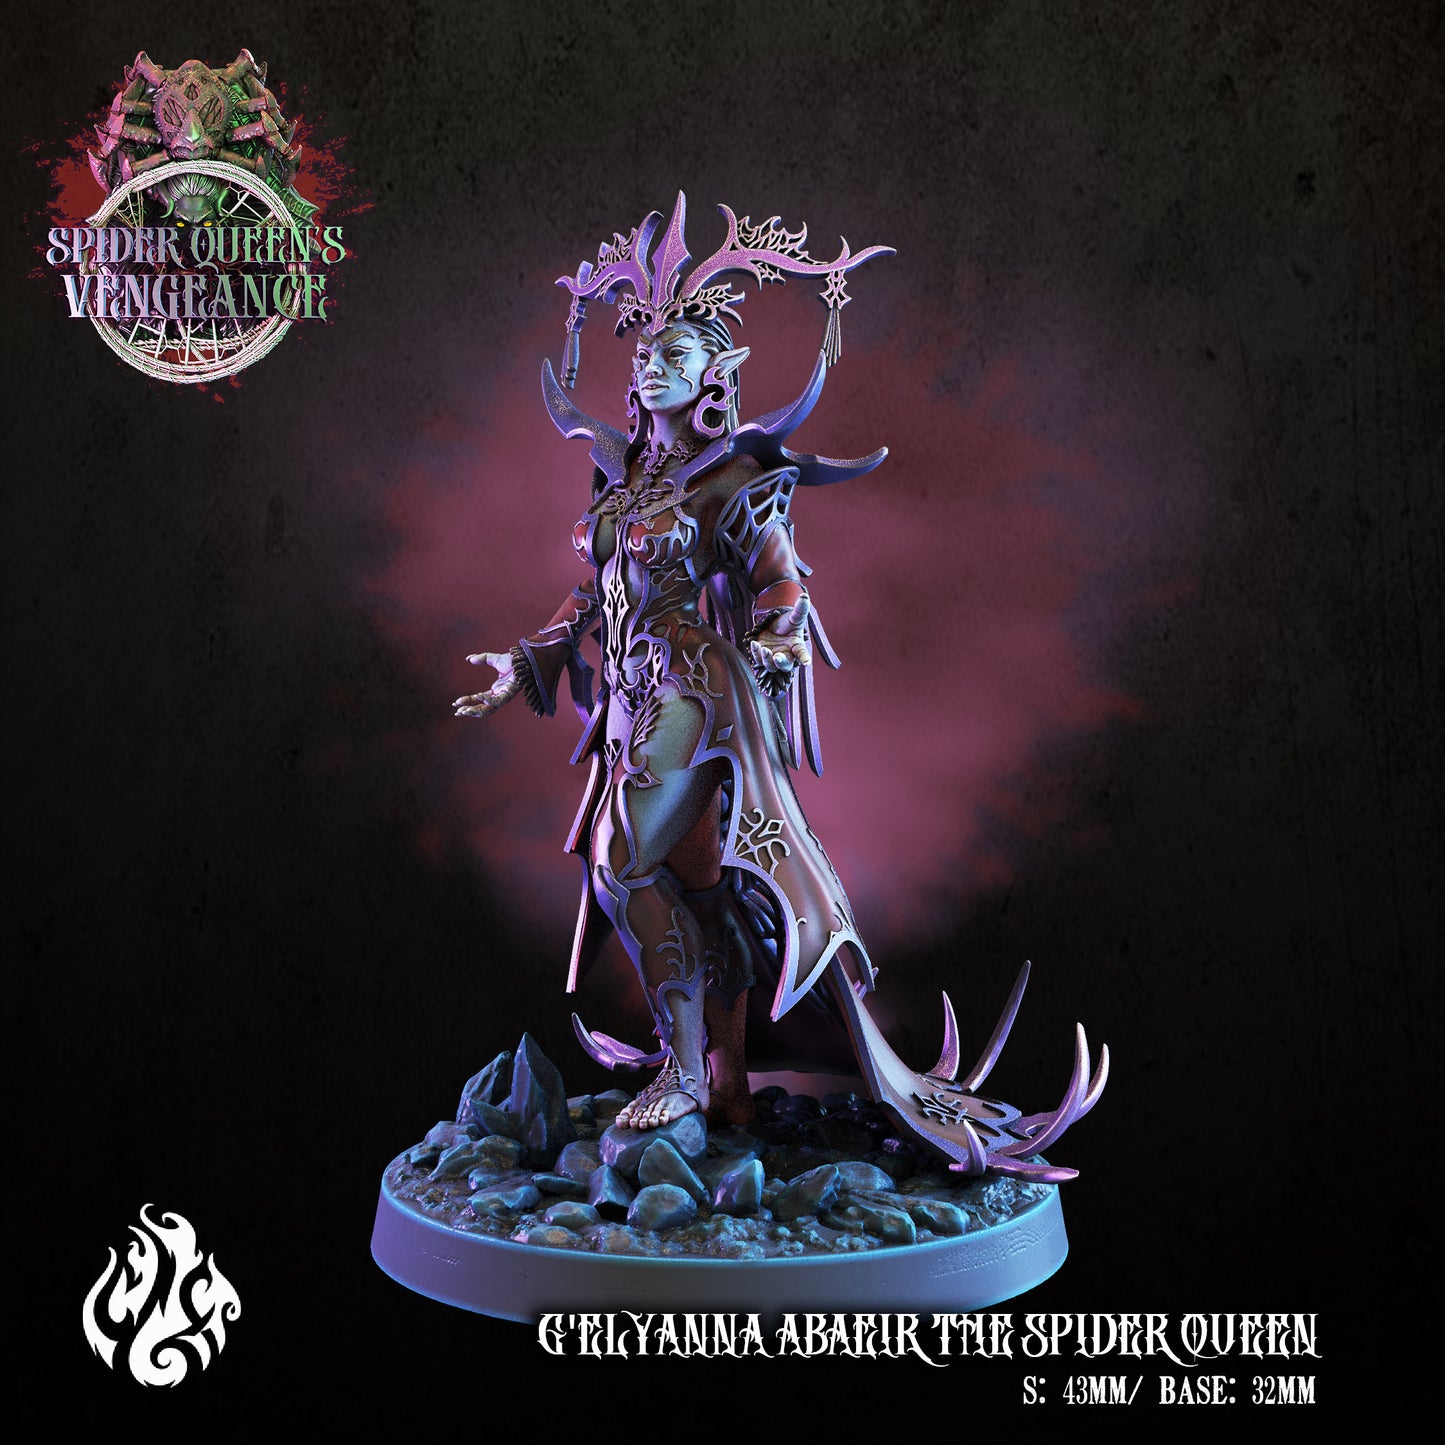 G'elyanna Abaeir the Spider Queen Spider Queen's Vengeance Series from Crippled God Foundry - Table-top gaming mini and collectable for painting.